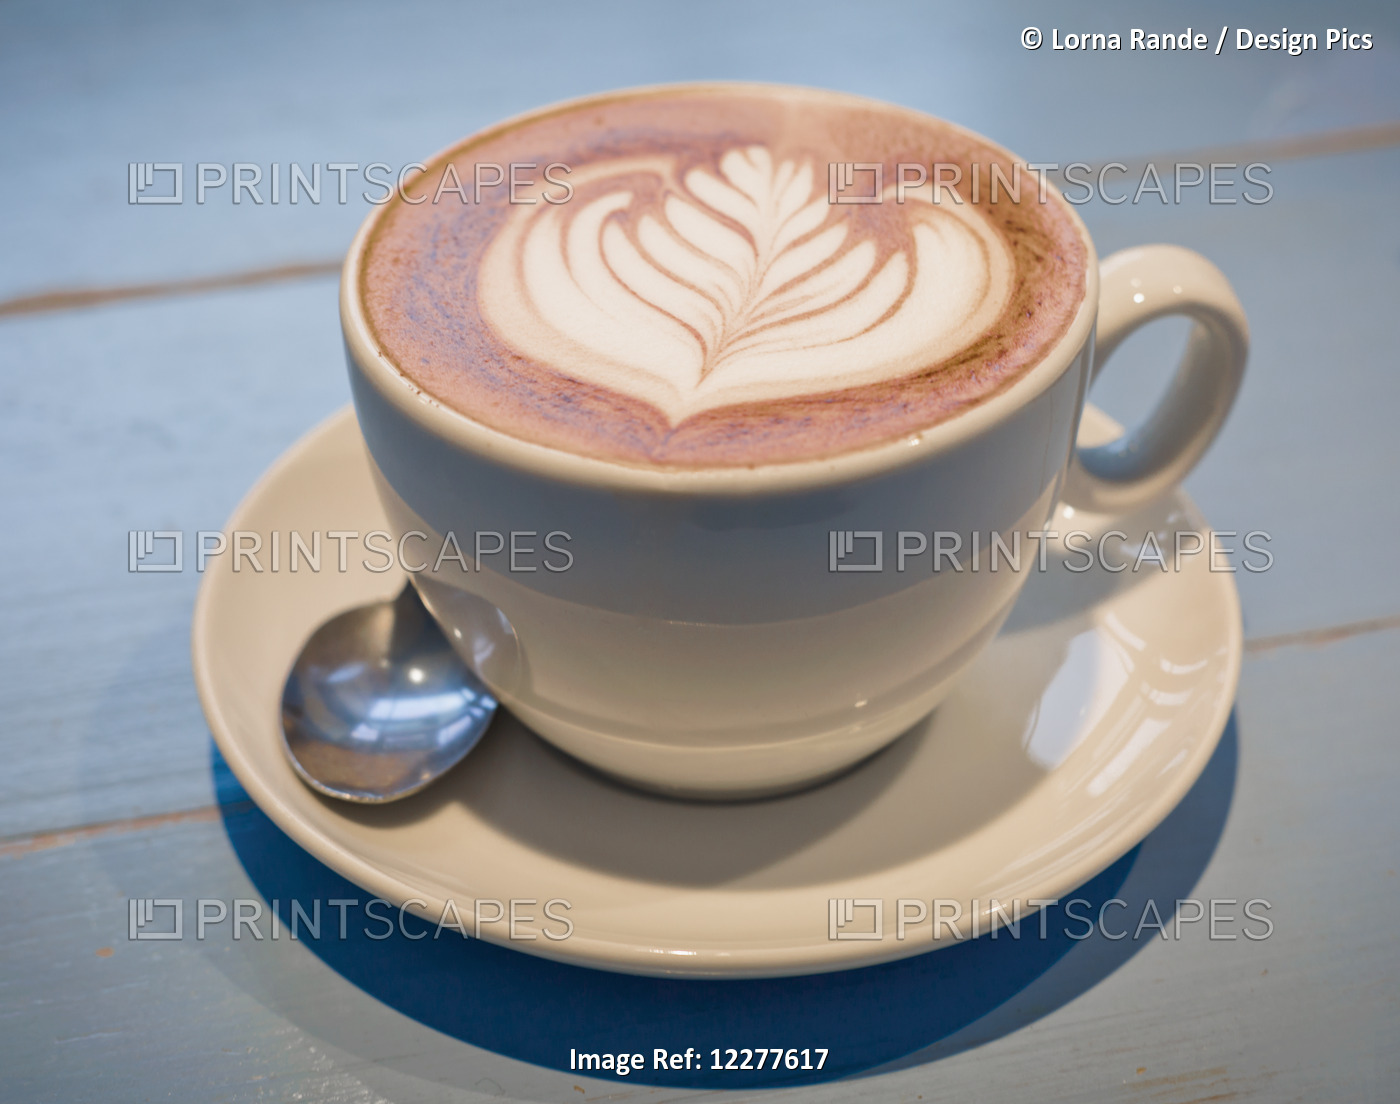 Hot Drink With Leaf Design In Milk On Surface; Vancouver, British Columbia, ...